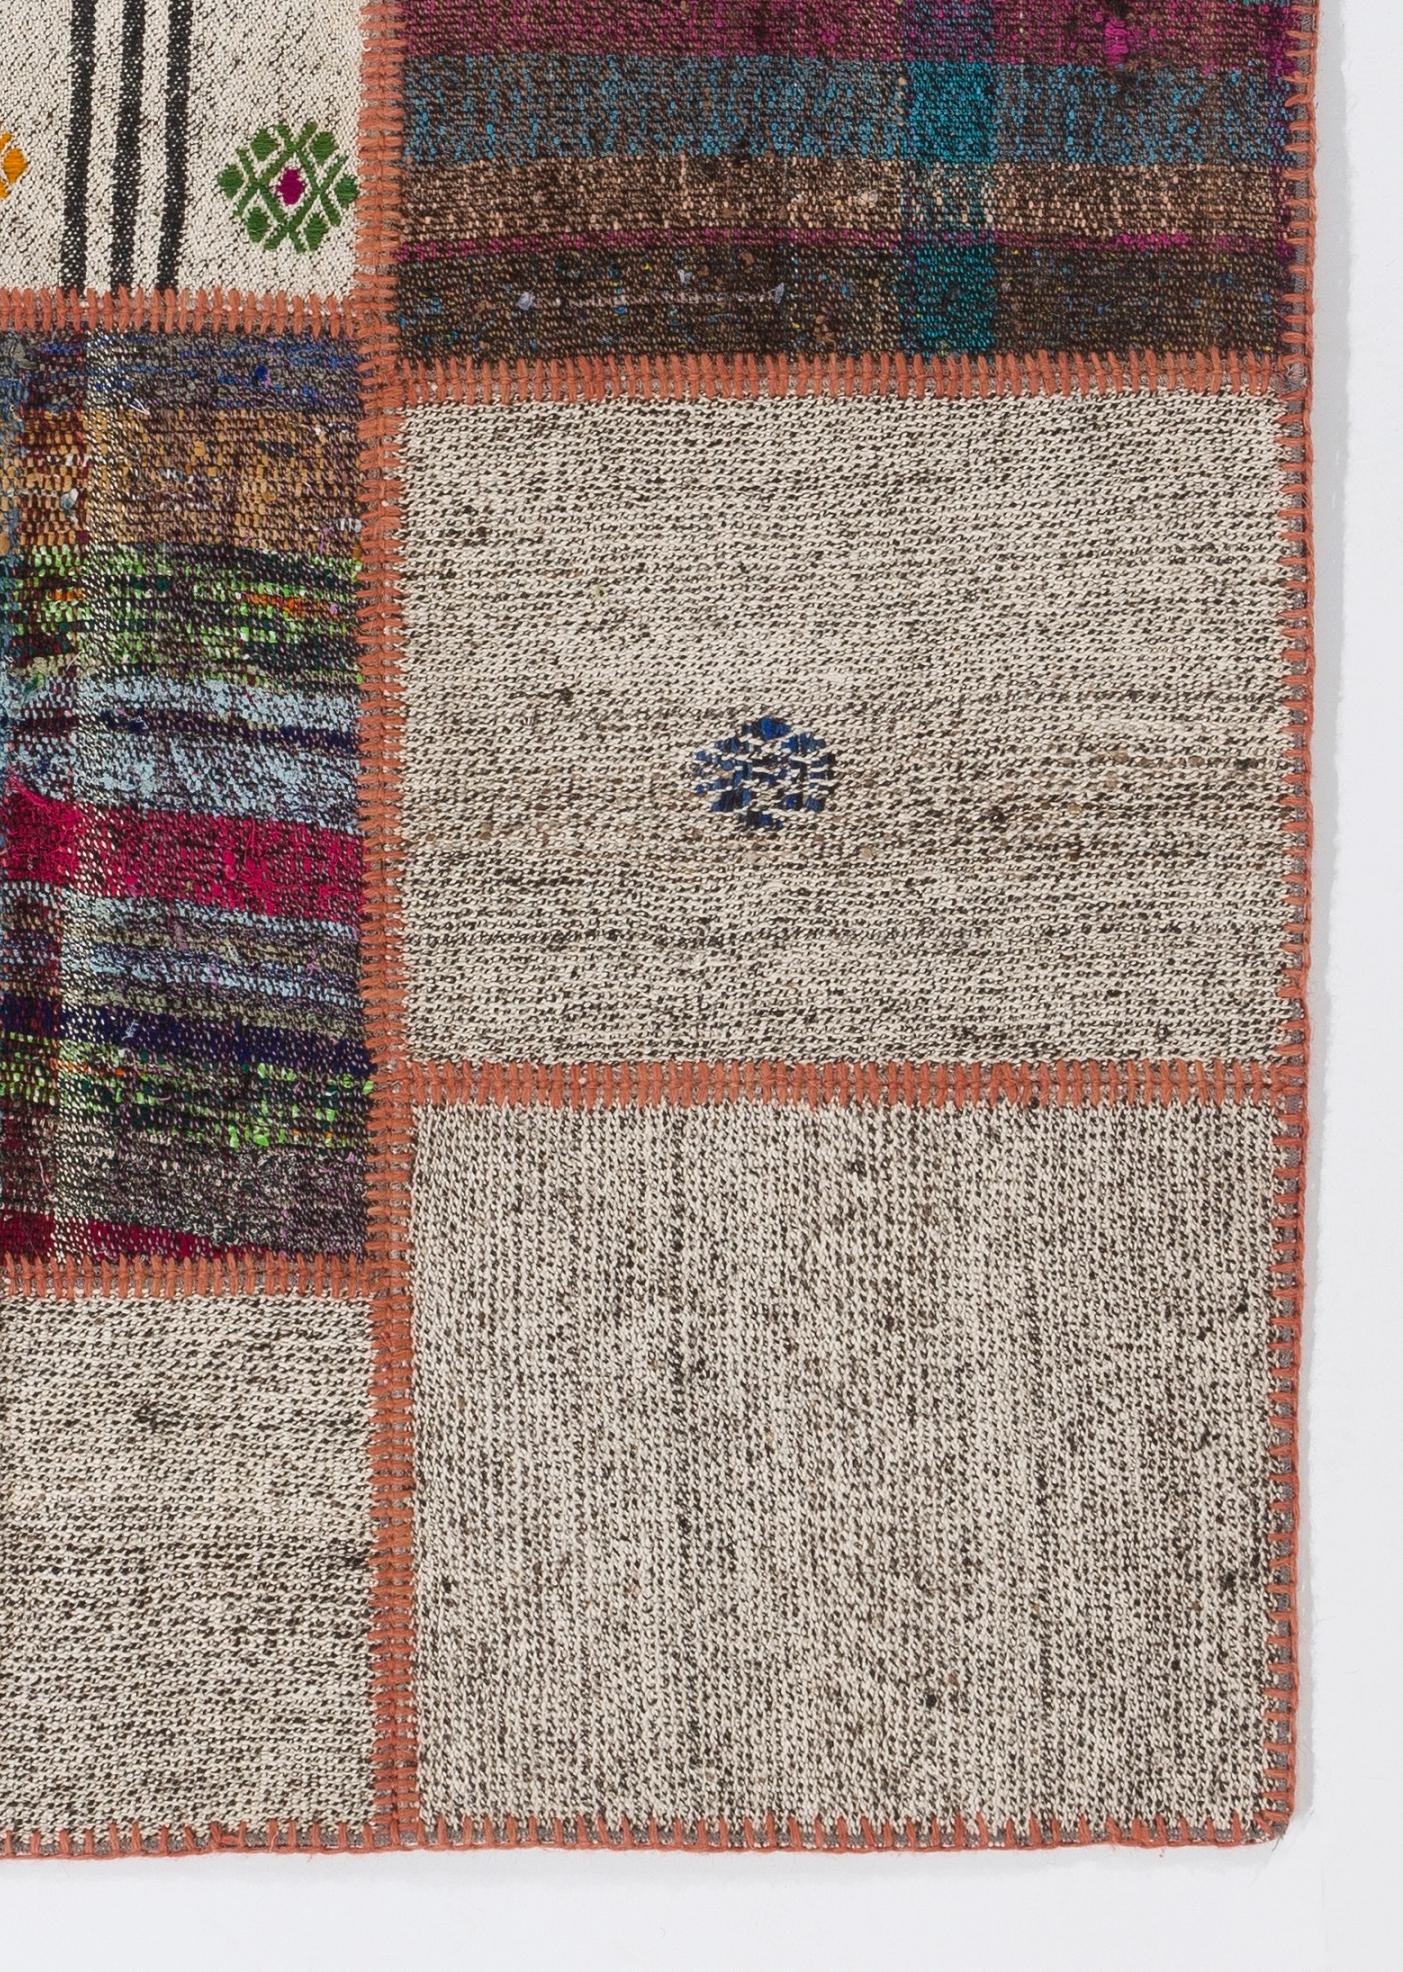 Contemporary 4.5x6.3 Ft Vintage Anatolian Kilims Re-Imagined, Custom Options Available For Sale